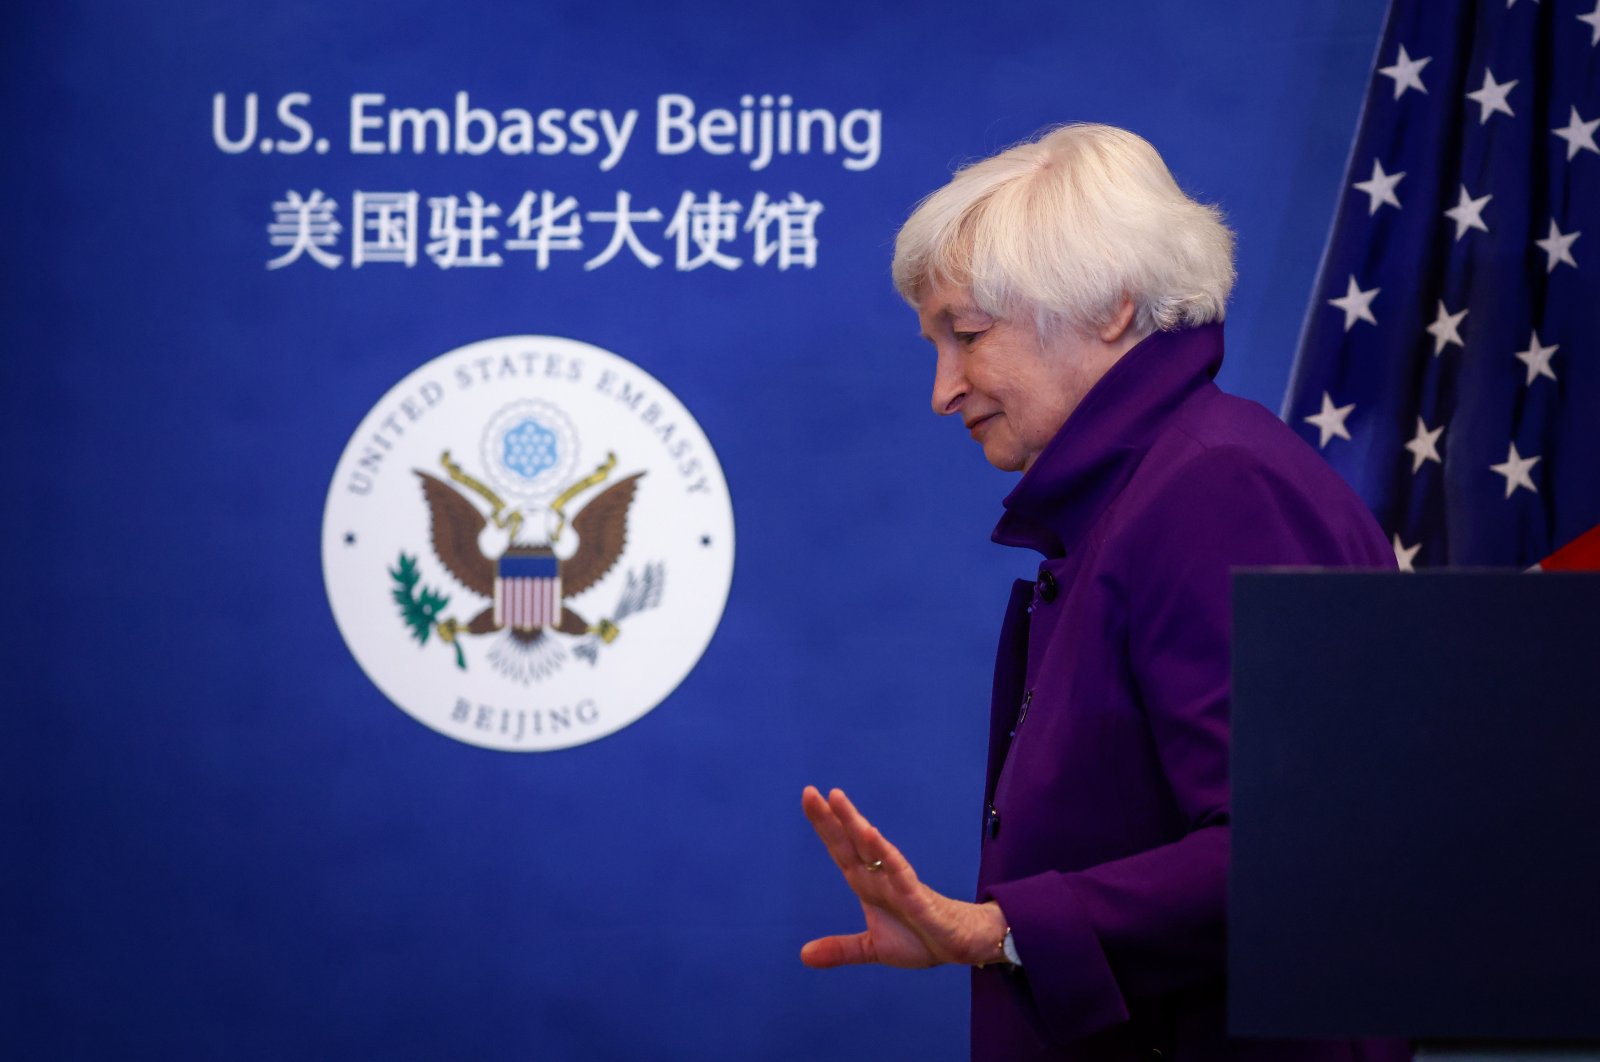 U.S. Treasury Secretary Janet Yellen gestures as she leaves a press conference at the U.S. Embassy in Beijing, China, 09 July 2023. (EPA/MARK R. CRISTINO)